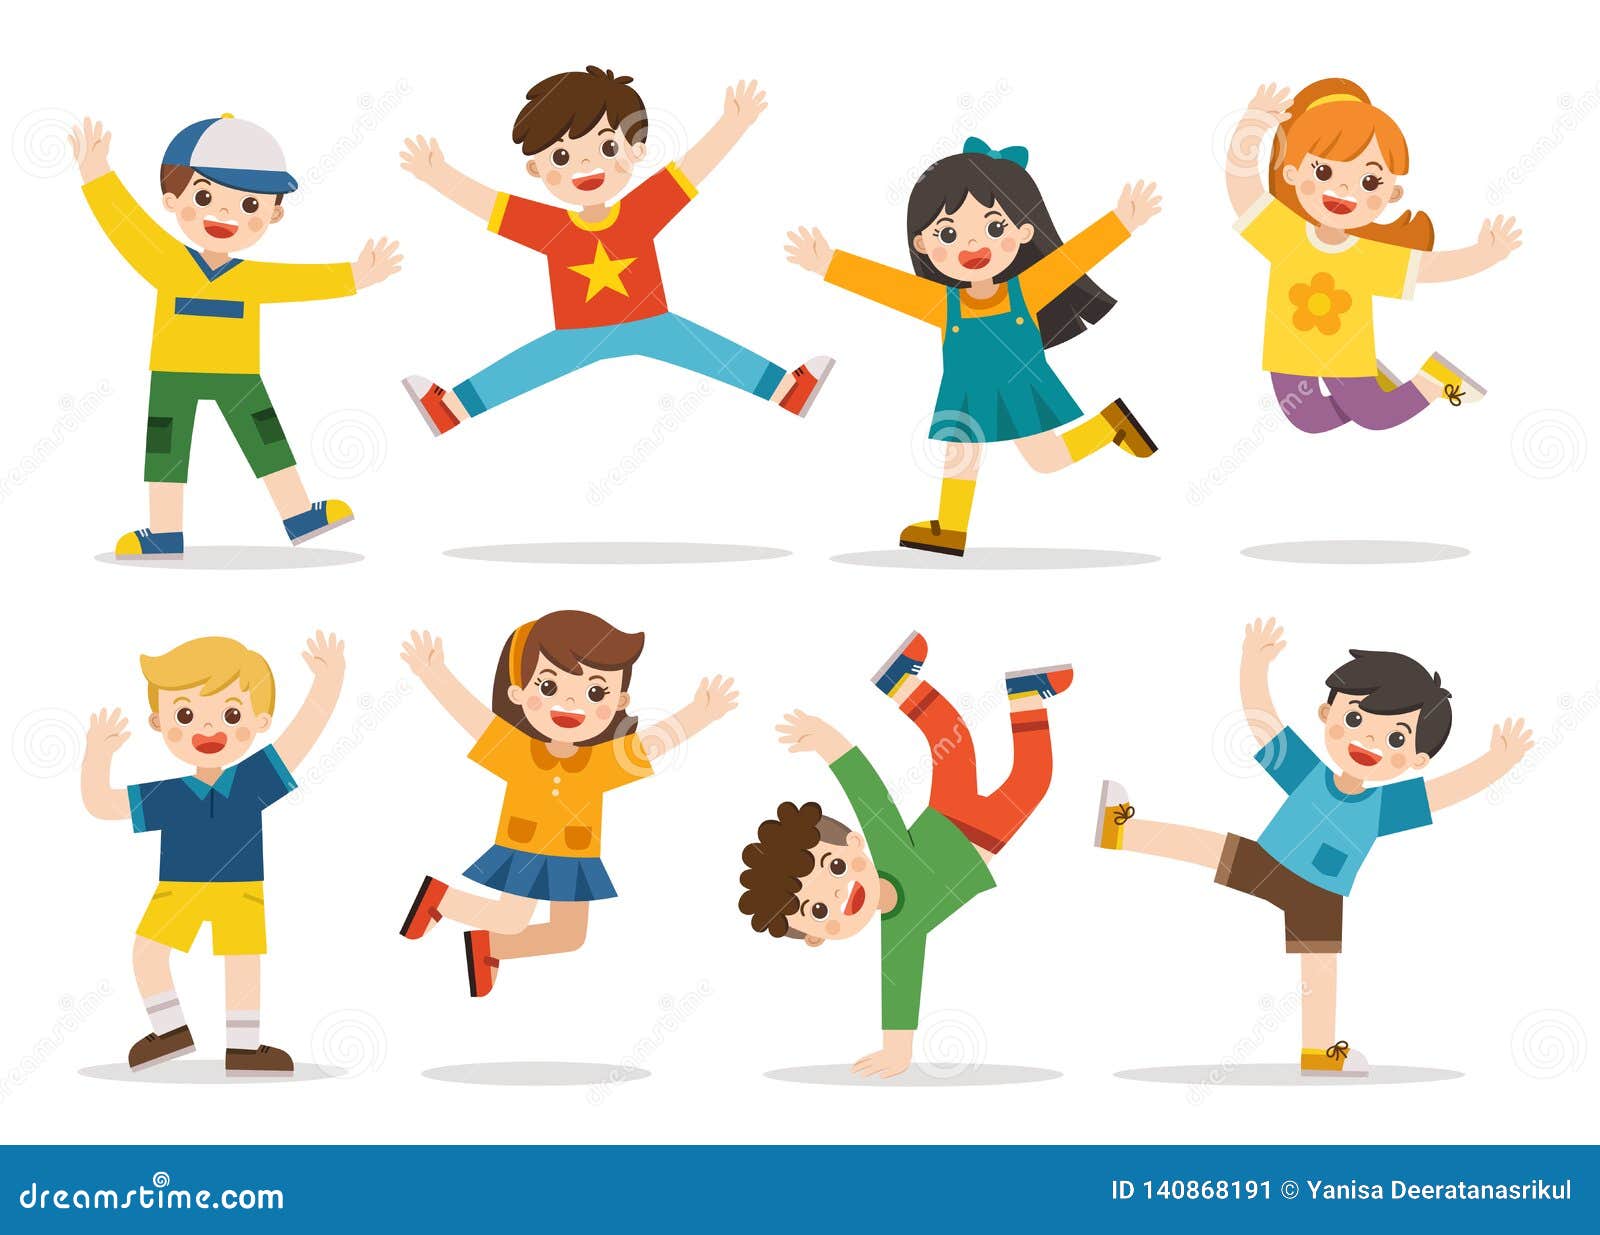 children`s activities. happy kids jumping together on the background. boys and girls are playing together happily.